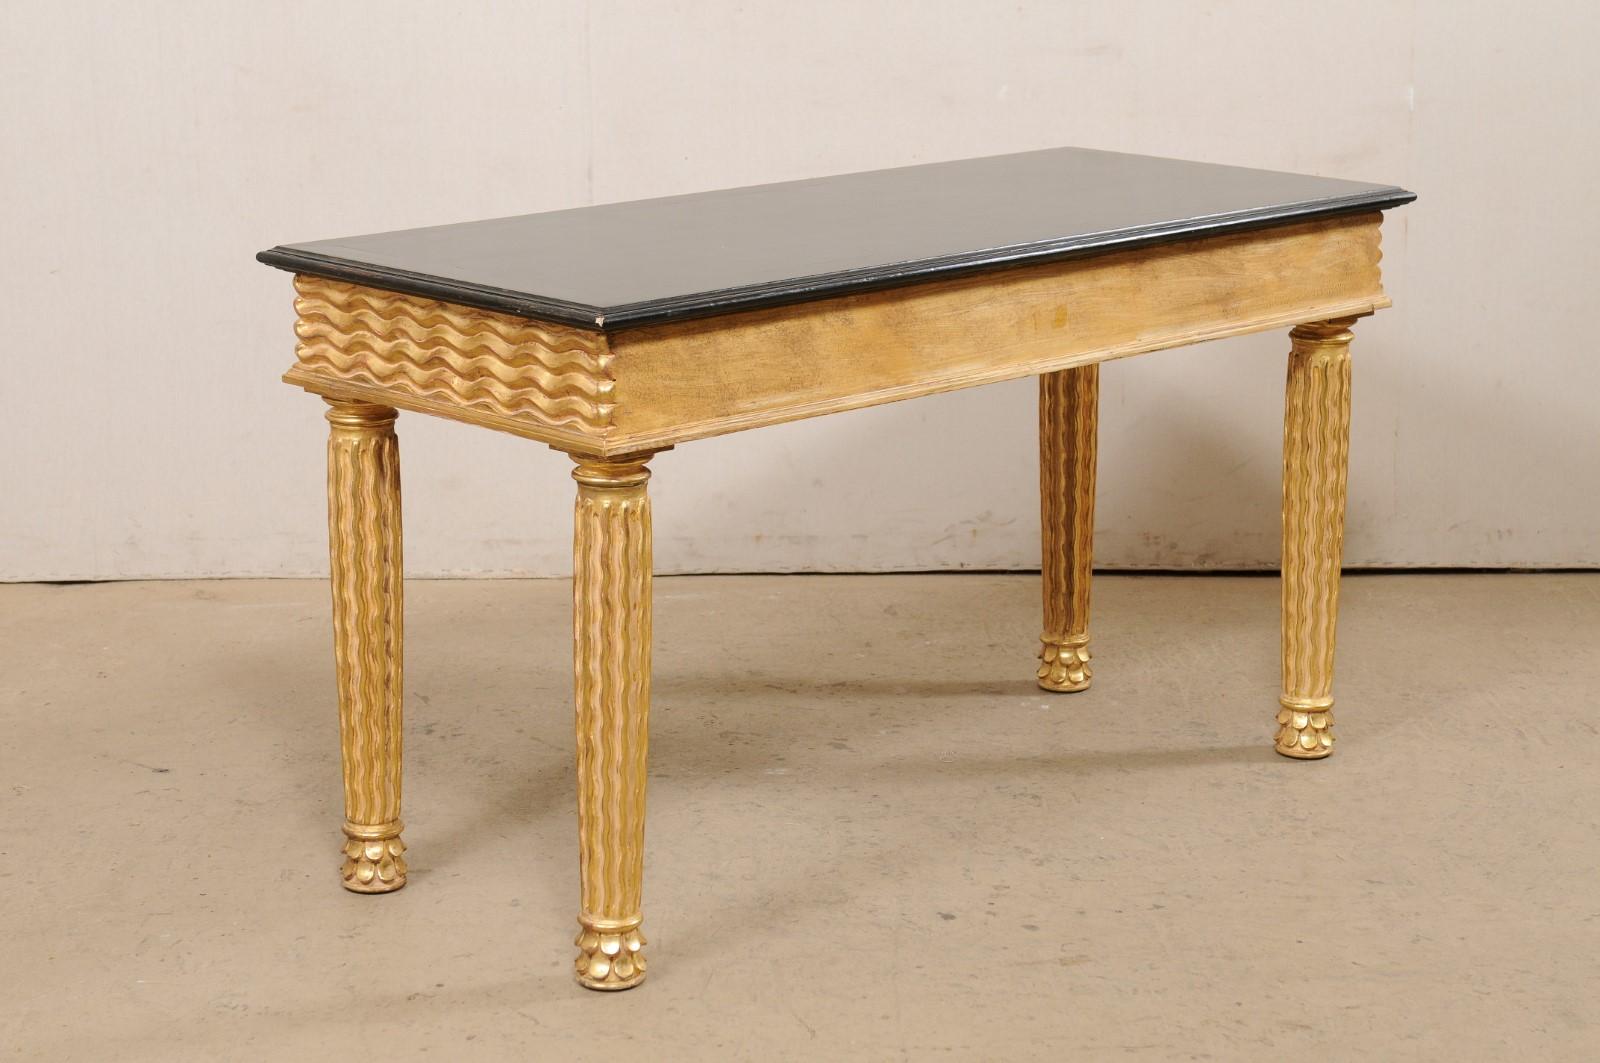 Italian Masterfully Hand-Carved Wooden Console Table with Real Gold Leafing For Sale 5